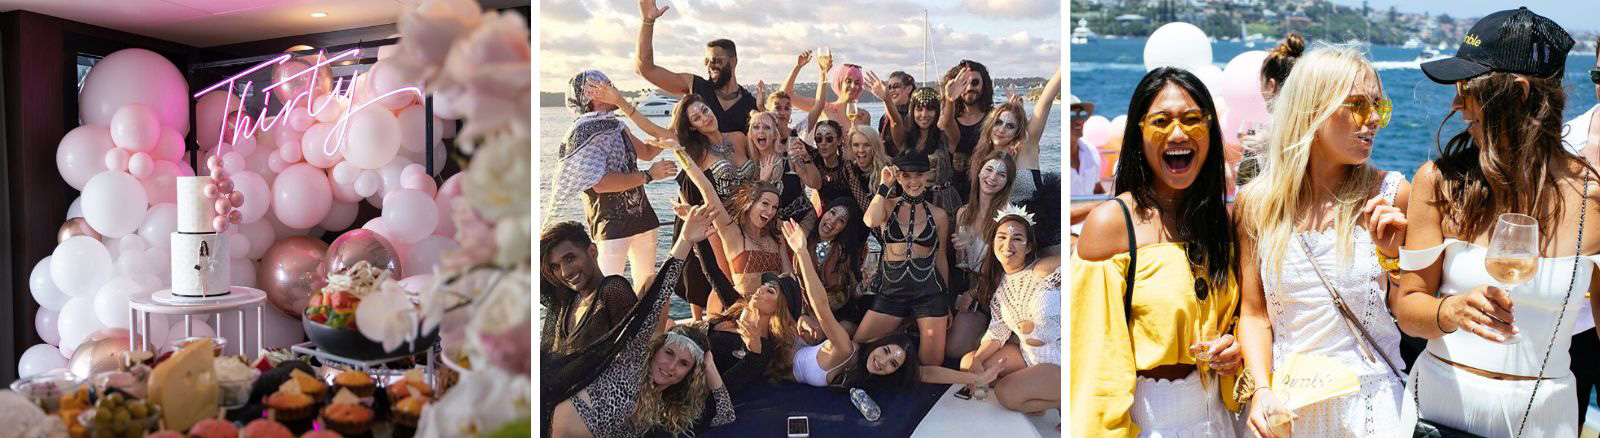 Birthday Boat Party: How to Plan a Cruise that Floats Everyone's Boat -  Sydney Harbour Days